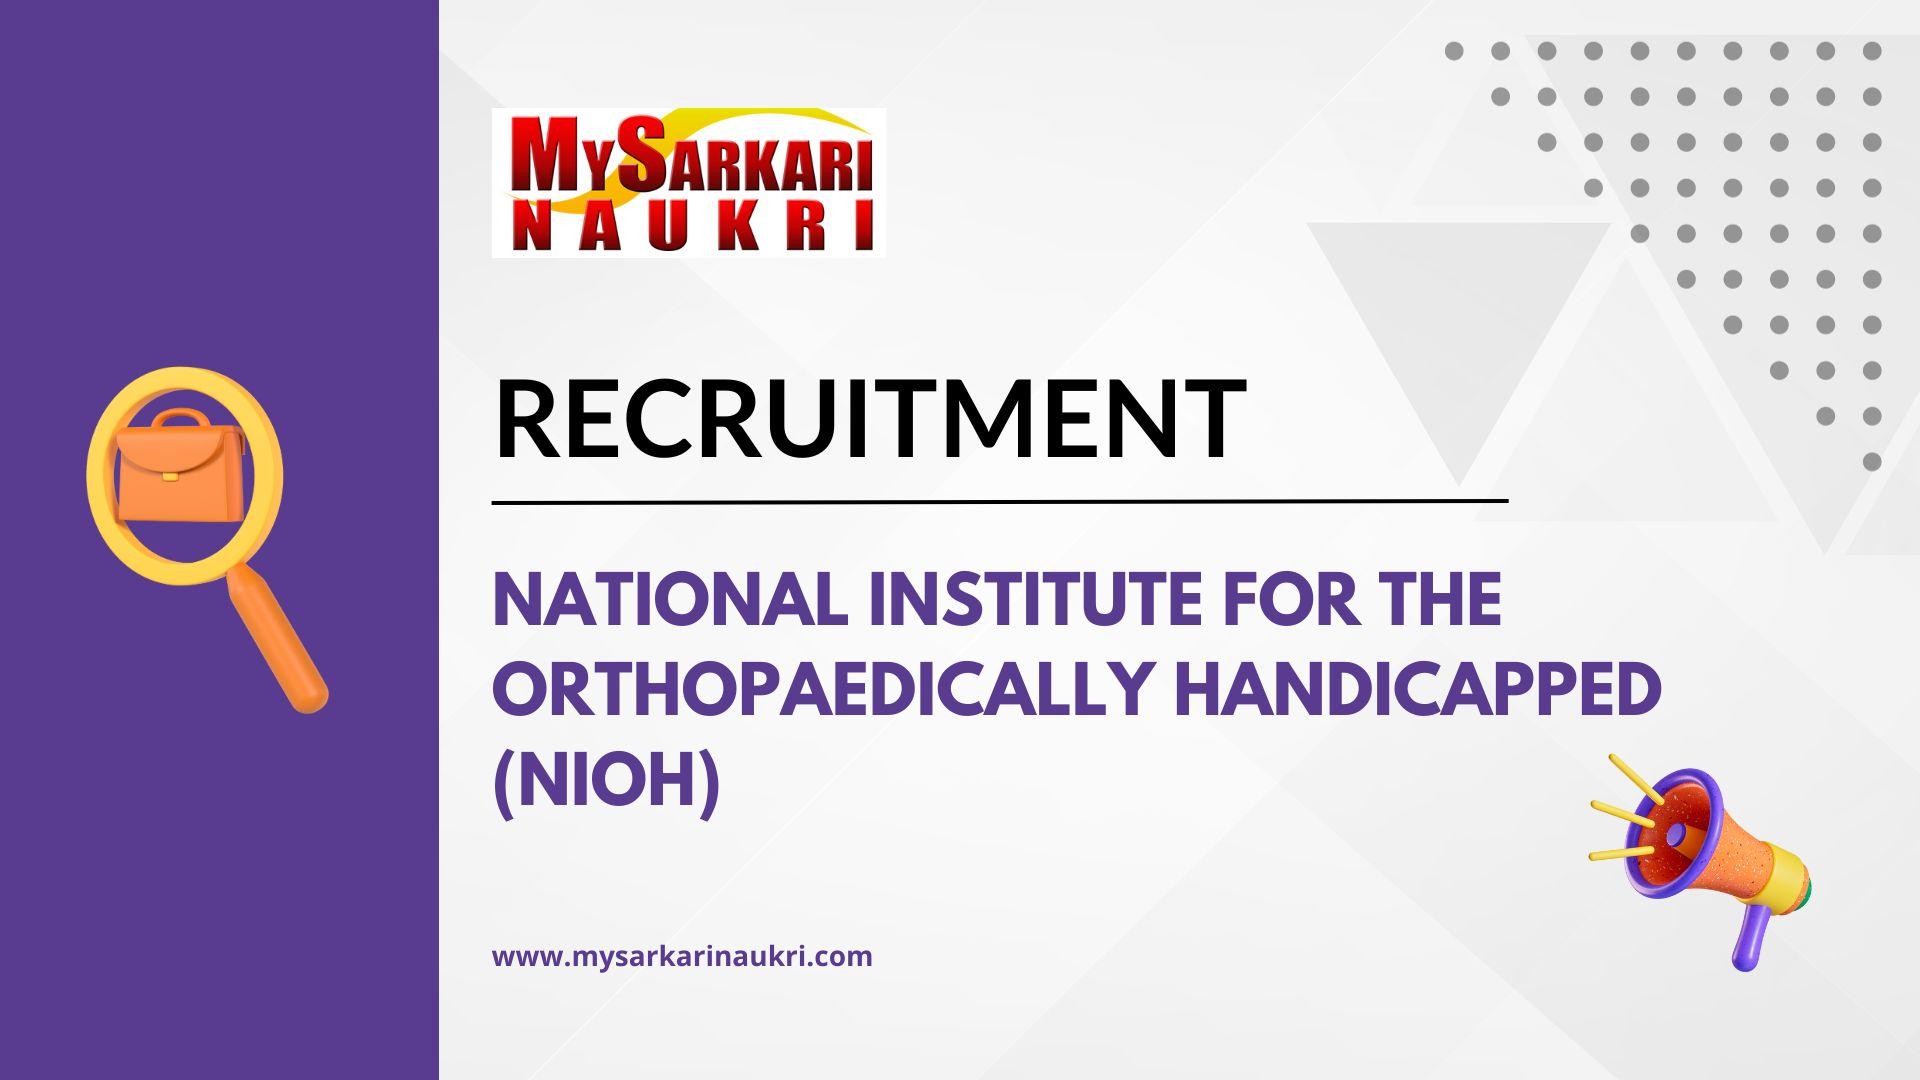 National Institute For The Orthopaedically Handicapped (NIOH) Recruitment